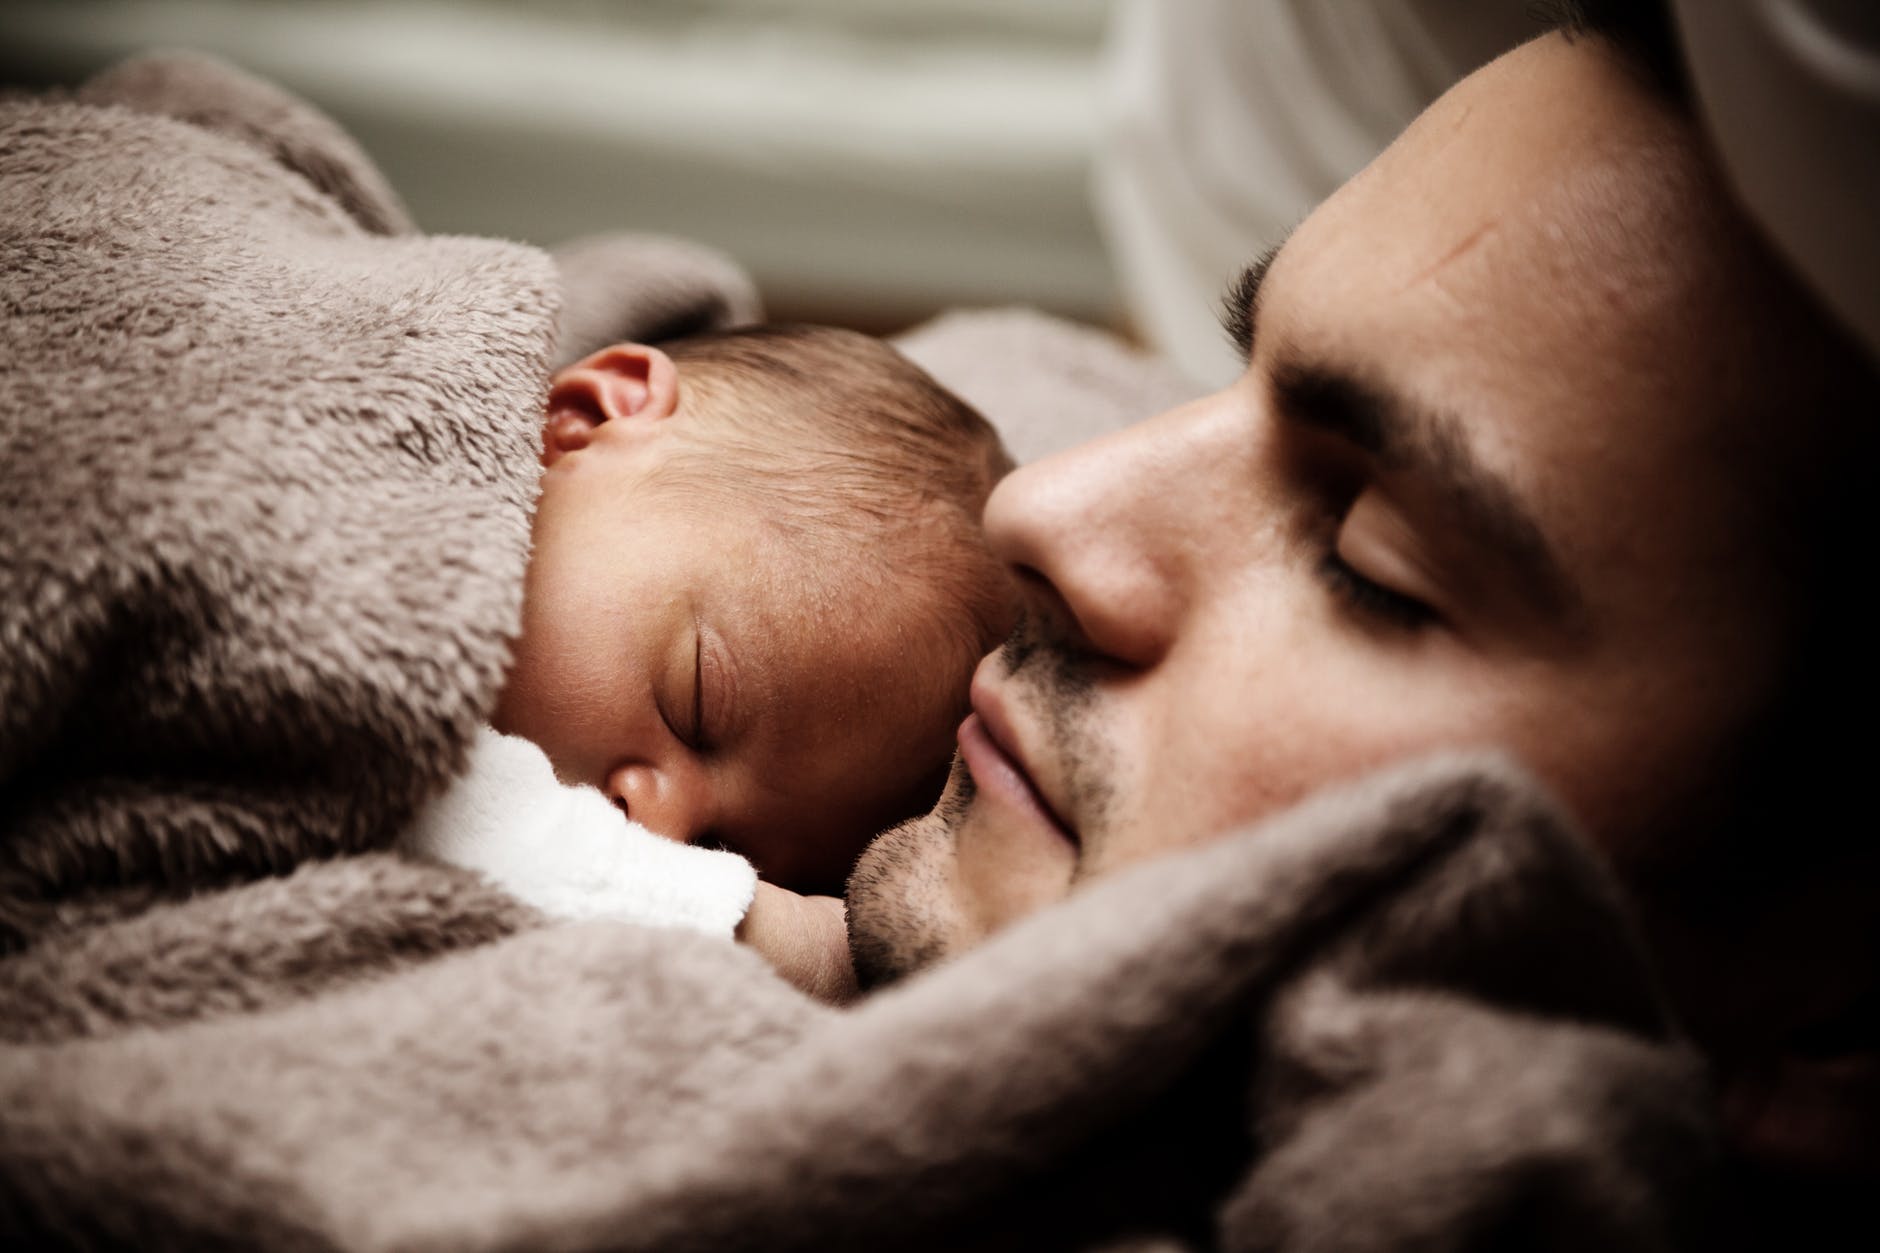 A doting dad sleeps in with his baby | Photo: Pexel